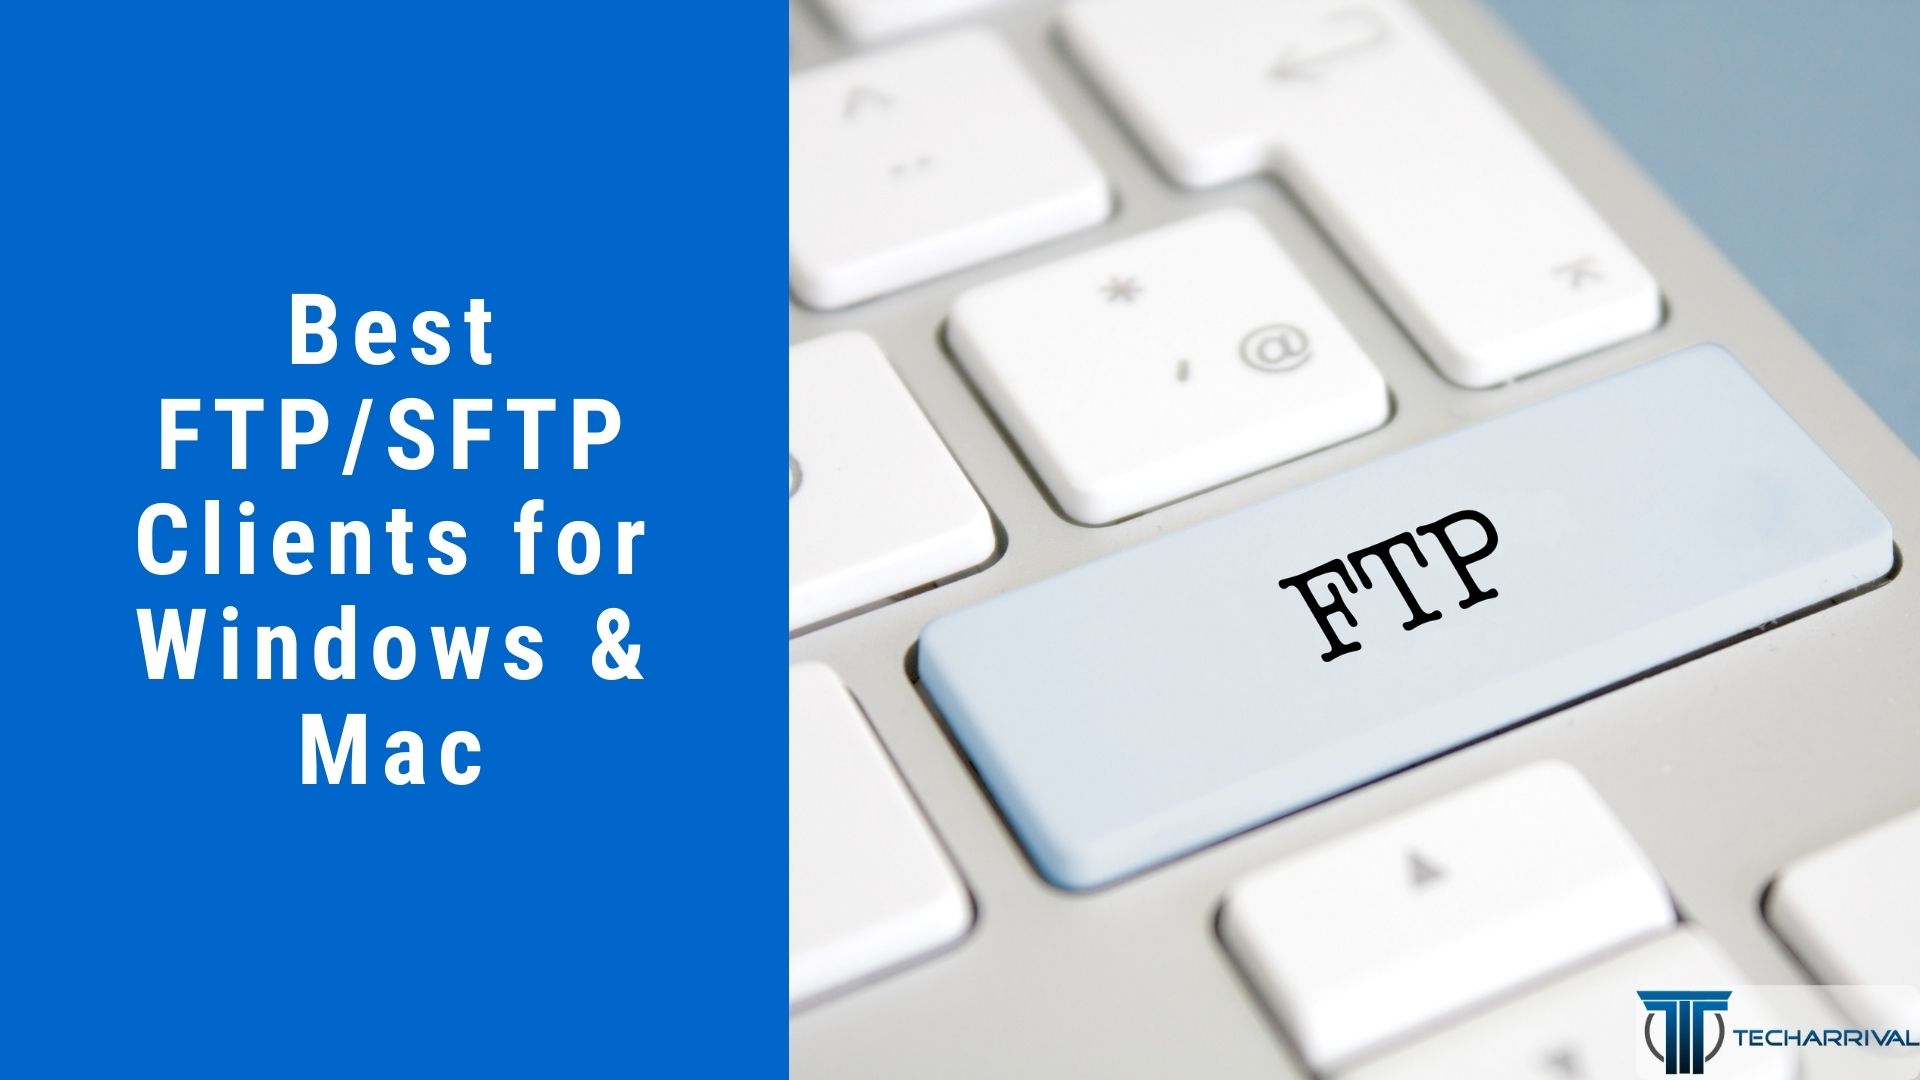 whats the best sftp for mac